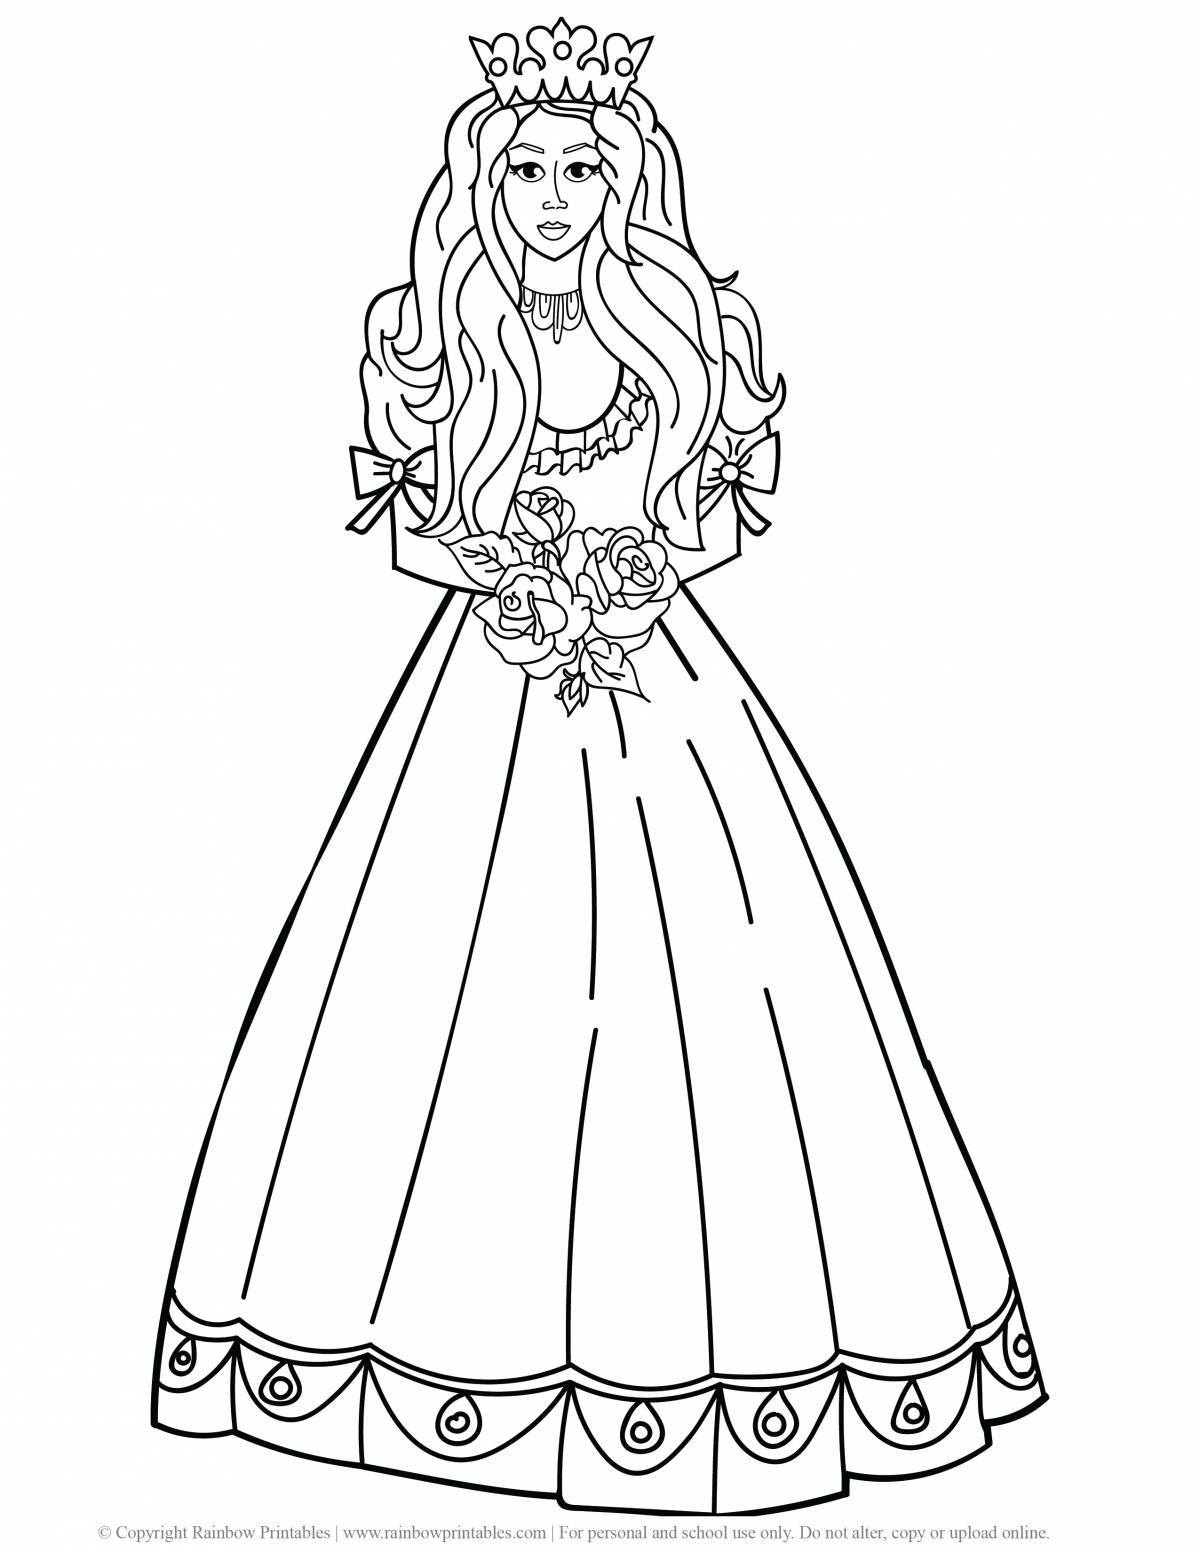 Coloring page for exalted princesses in pretty dresses